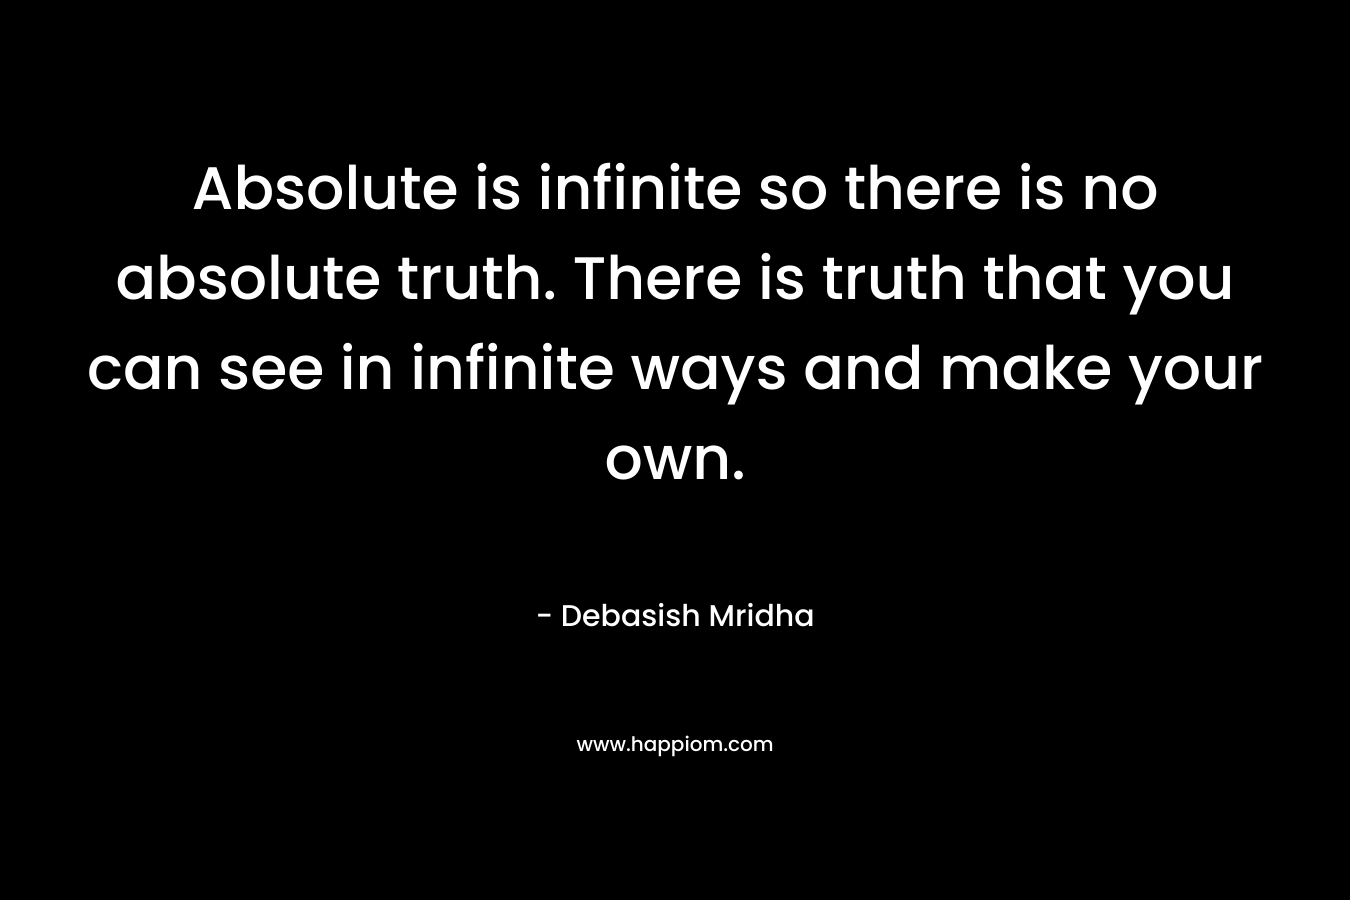 Absolute is infinite so there is no absolute truth. There is truth that you can see in infinite ways and make your own.